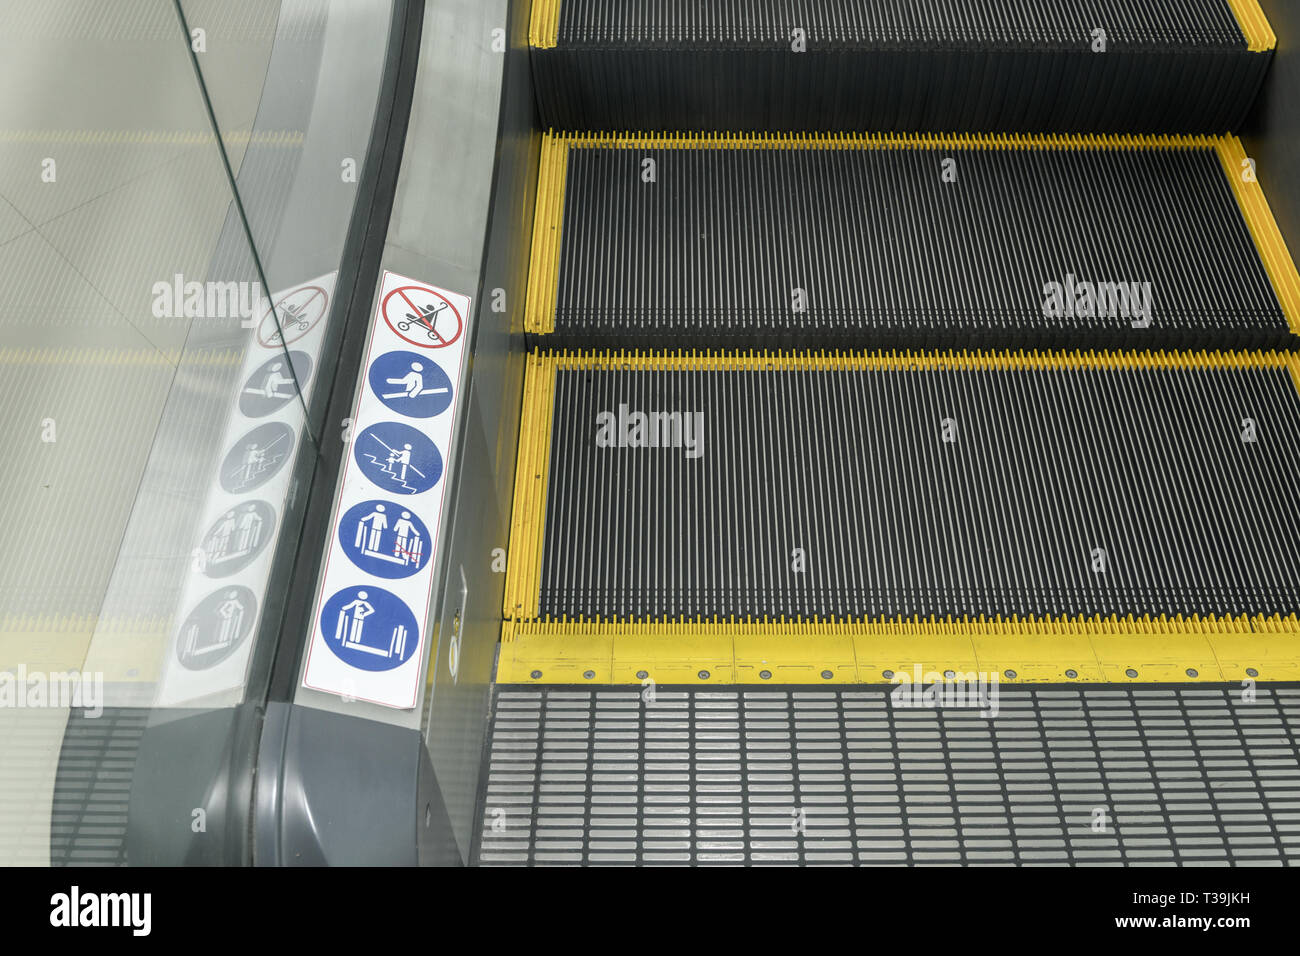 Signs on an escalator, warning signs, the escalator at the Building, safety concept Stock Photo